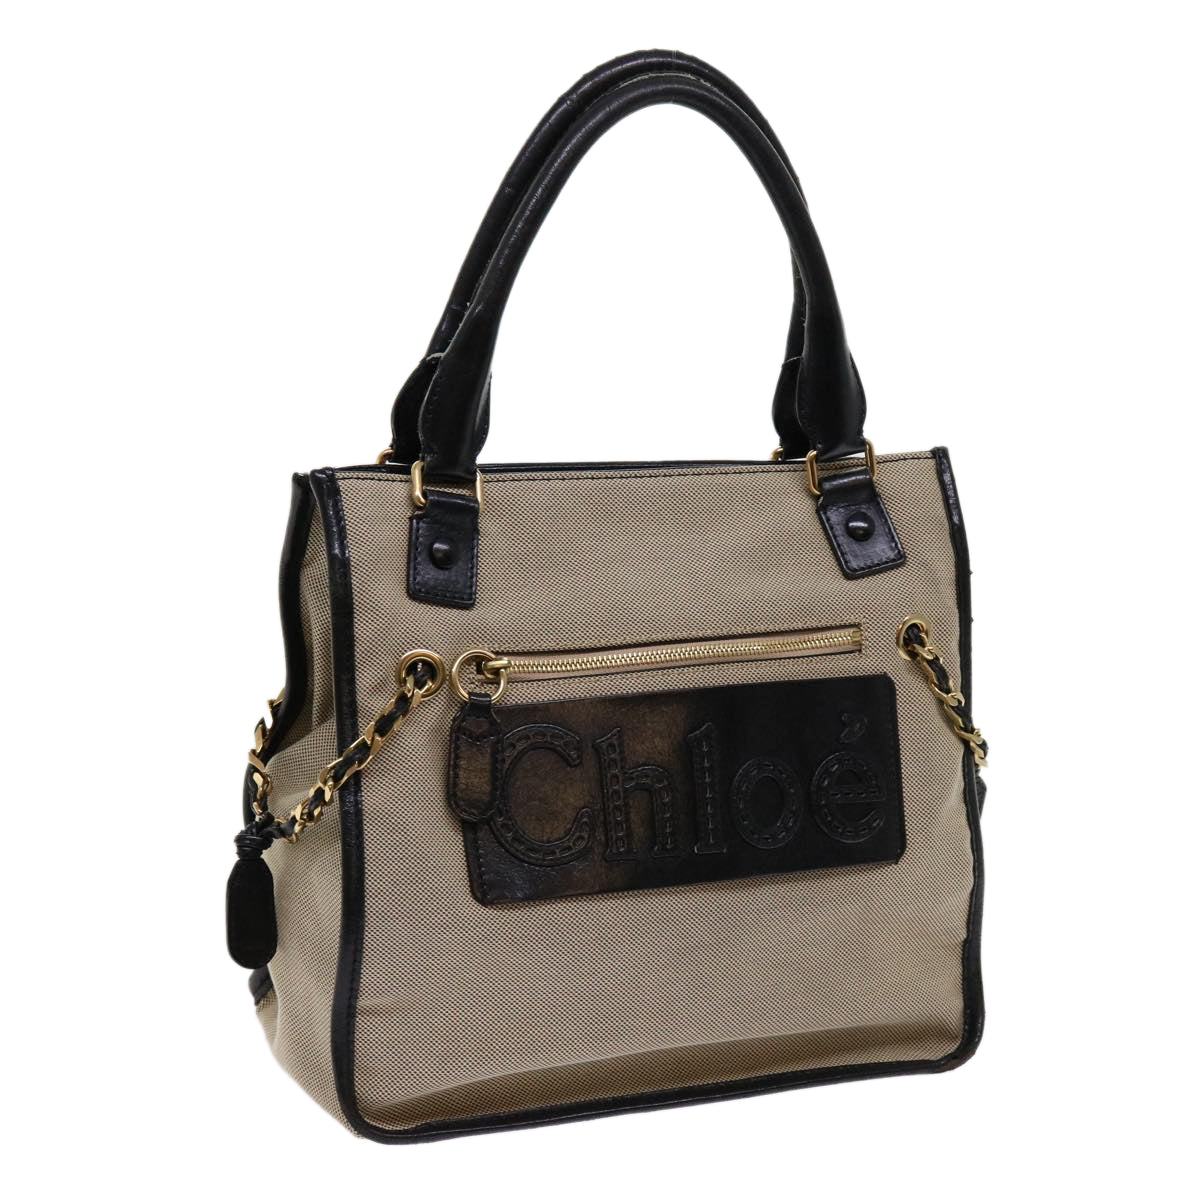 Chloe Harley Hand Bag Canvas Leather Beige Auth fm3111